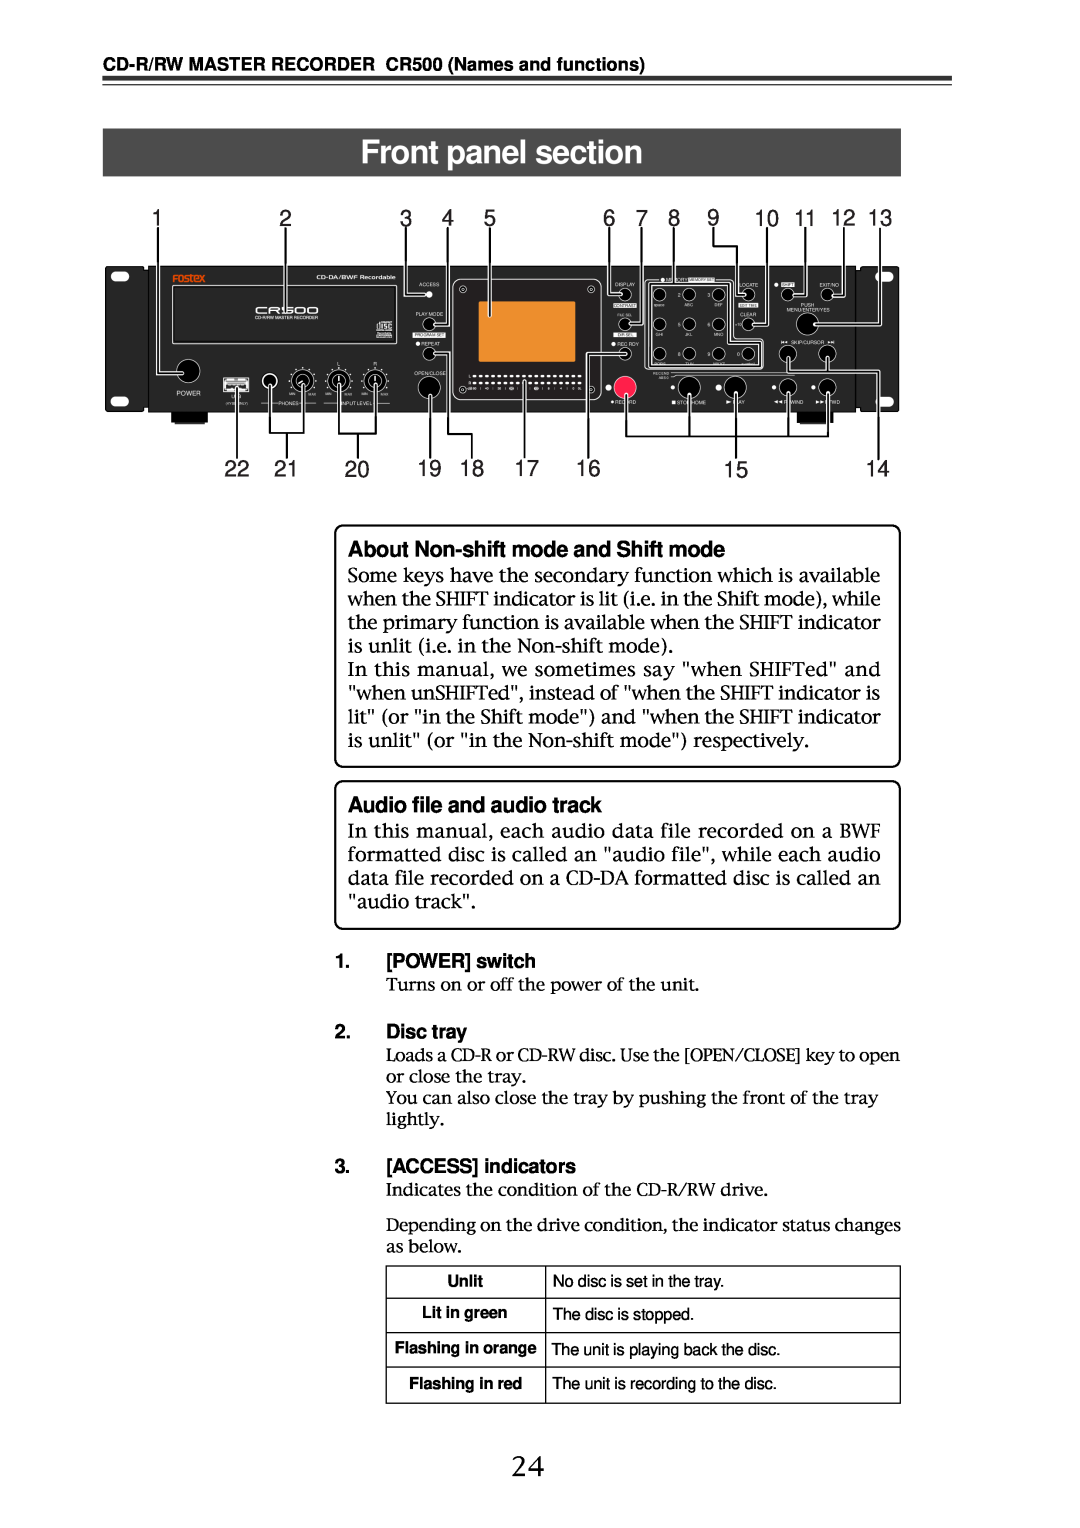 Fostex CR500 owner manual Front panel section, About Non-shiftmode and Shift mode, Audio file and audio track 